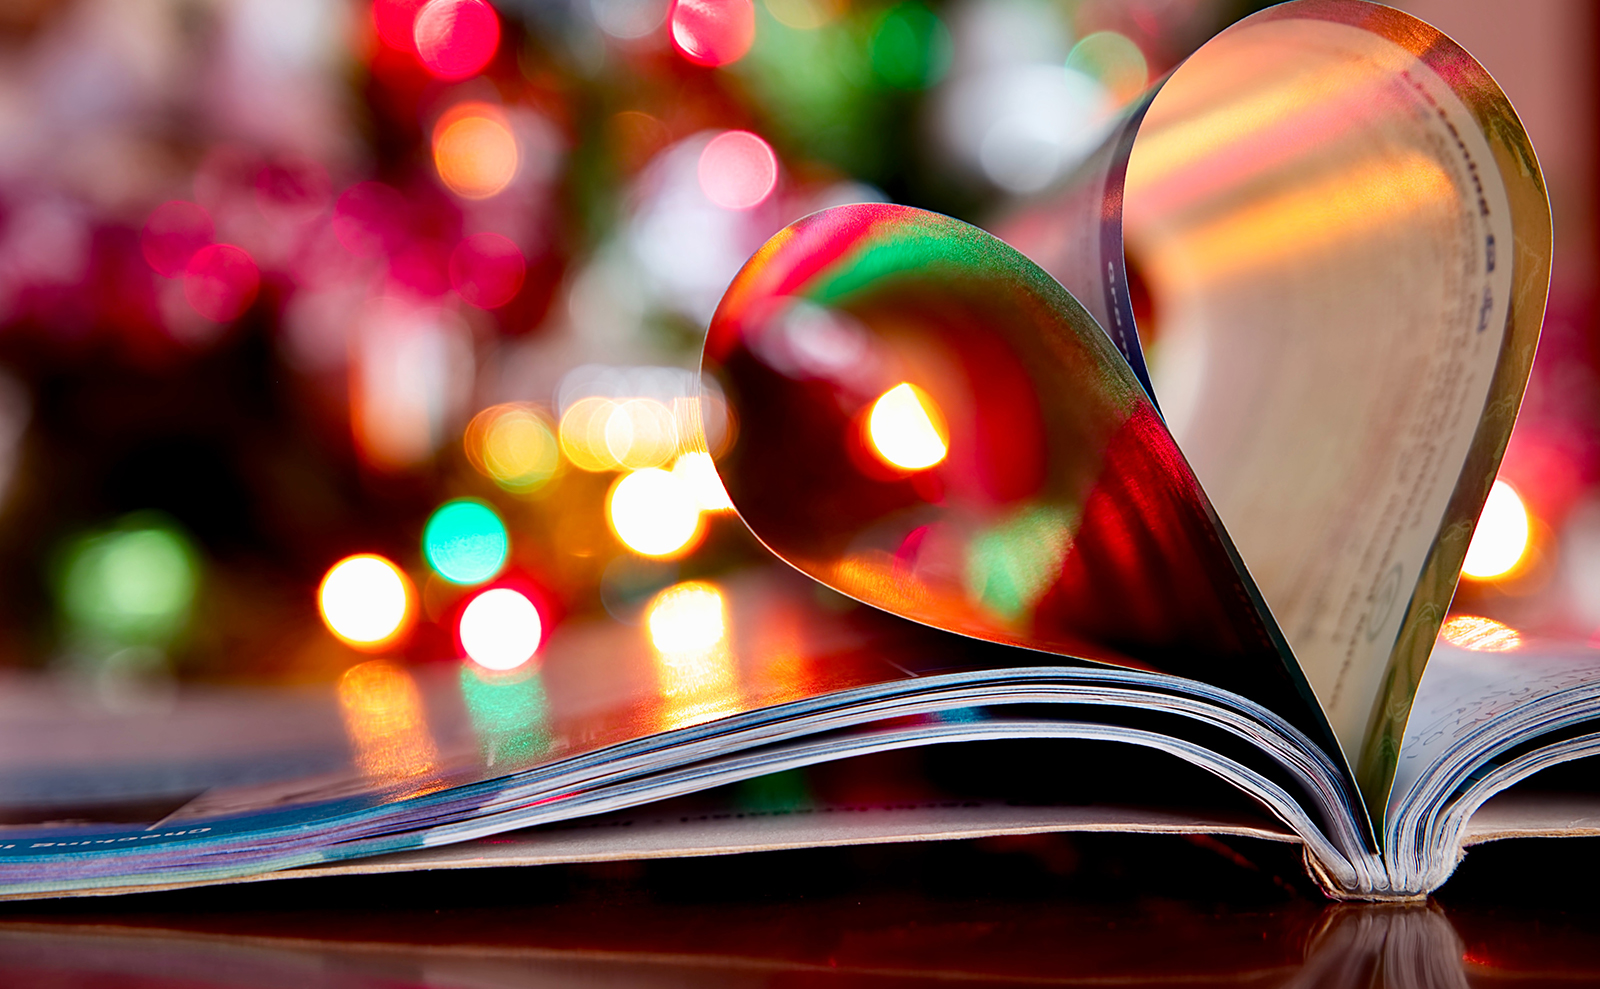 Spend Christmas Eve in Cozy Pajamas with a Box of Chocolates and a New Book with Book Flood